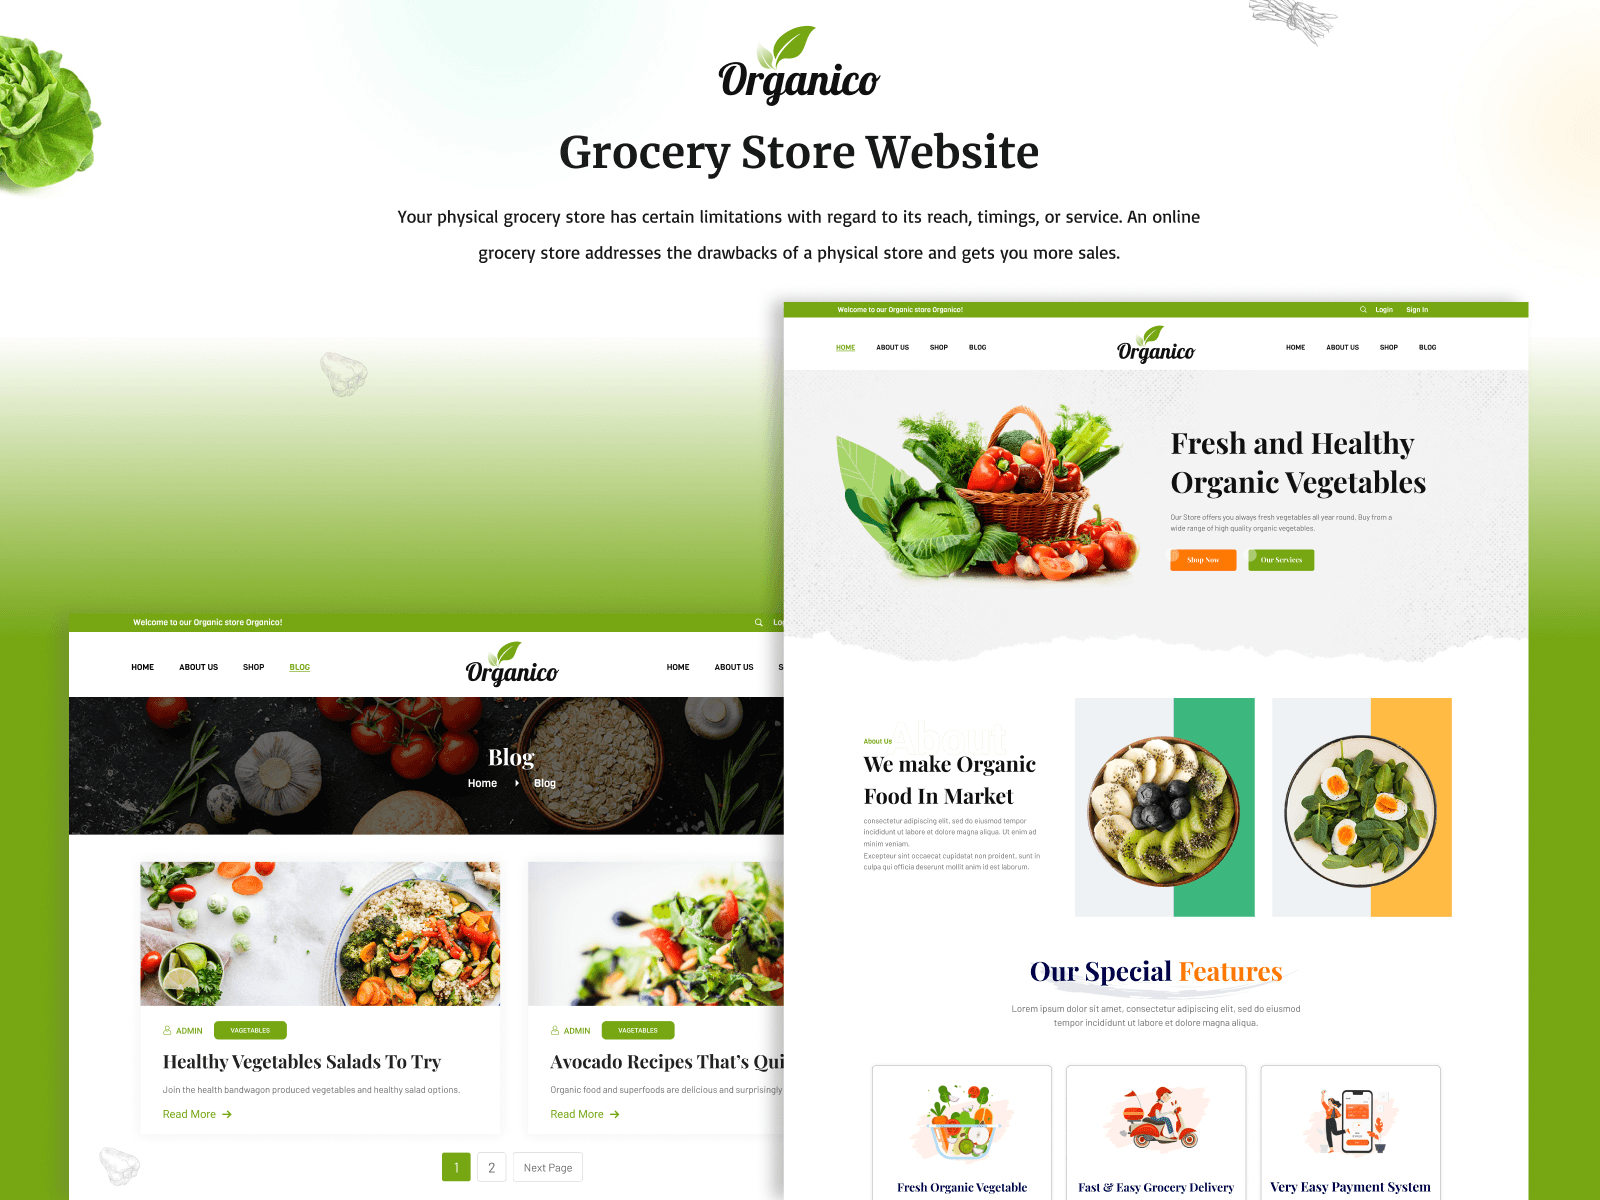 Grocery Delivery Website - UI/UX e commerce food delivery website foods grocery grocery delivery market marketplace online delivery organic supermarket